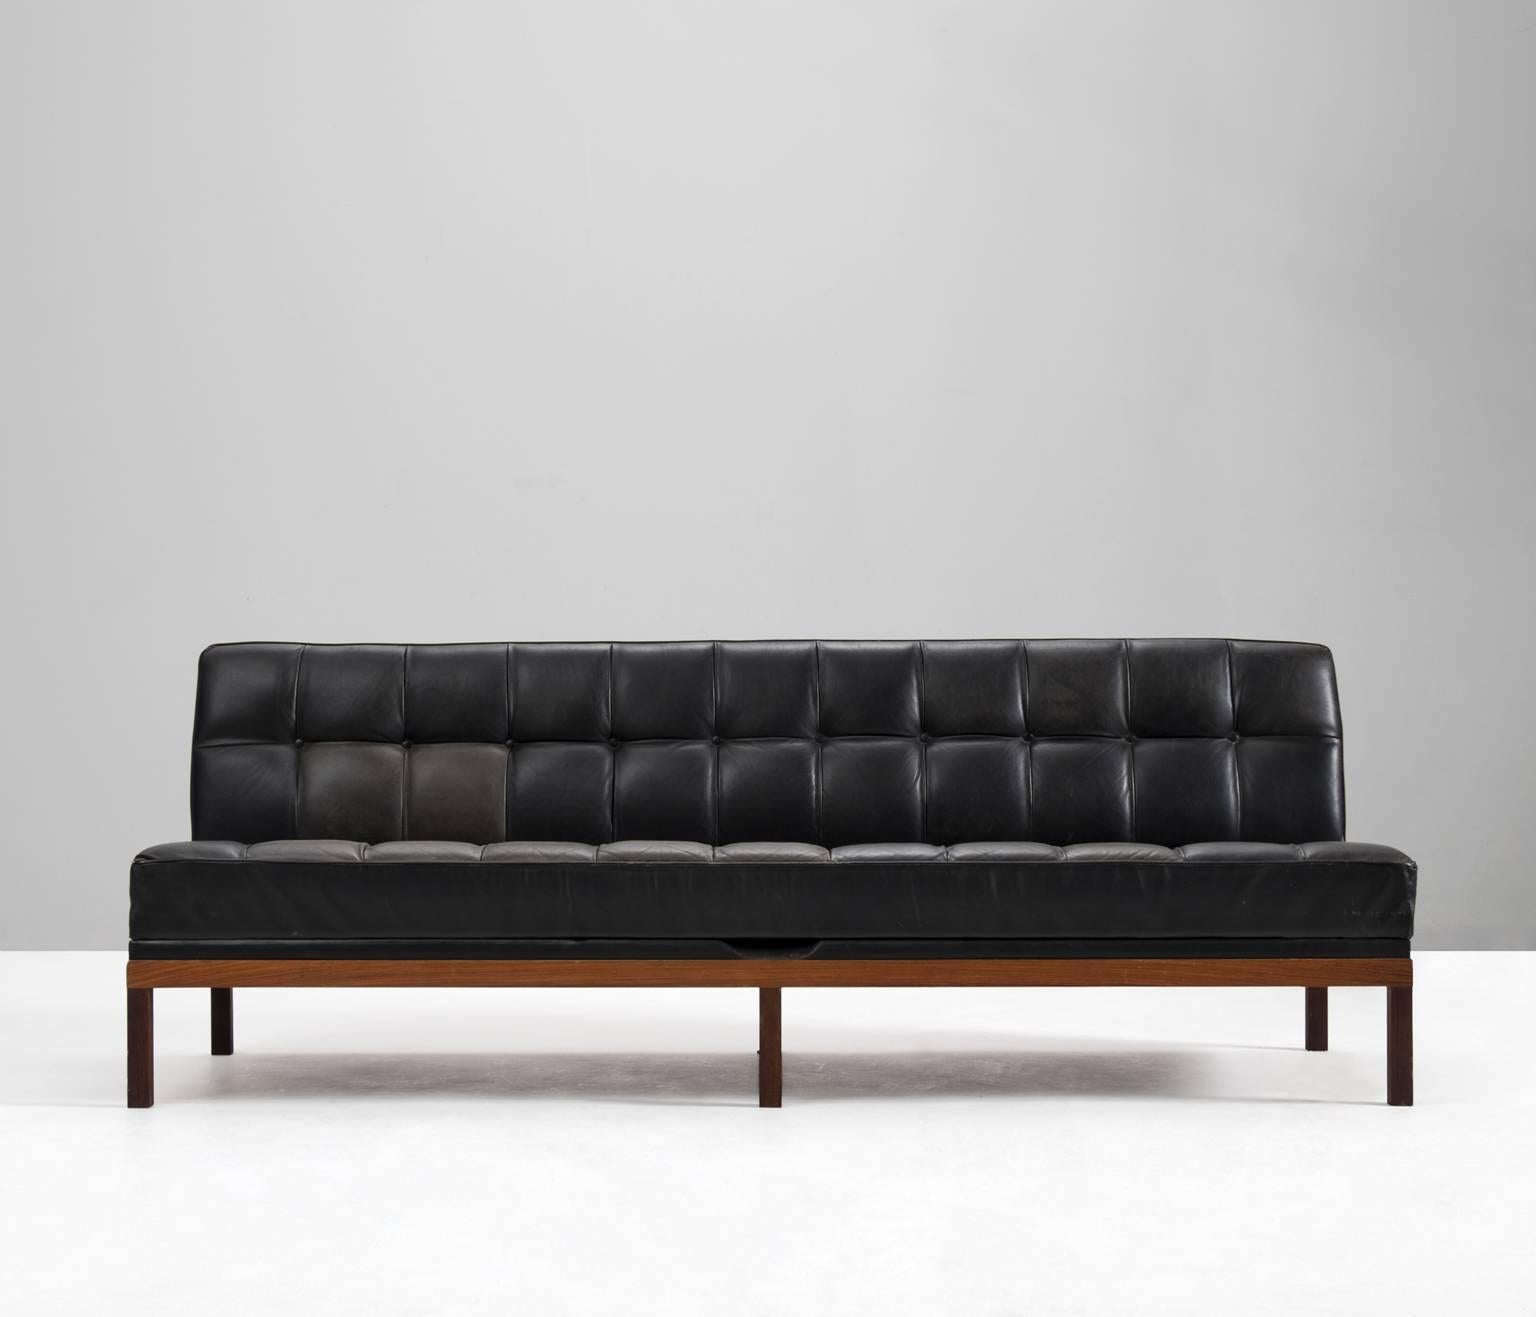 Very nice sofa or daybed by Johannes Spalt for Wittmann, Austria 1960s. 

Superb daybed named 'Constanza.' This early model, with rare rosewood frame, is hard to find nowadays. Very elegant slim legs which creates an open feeling and give the sofa